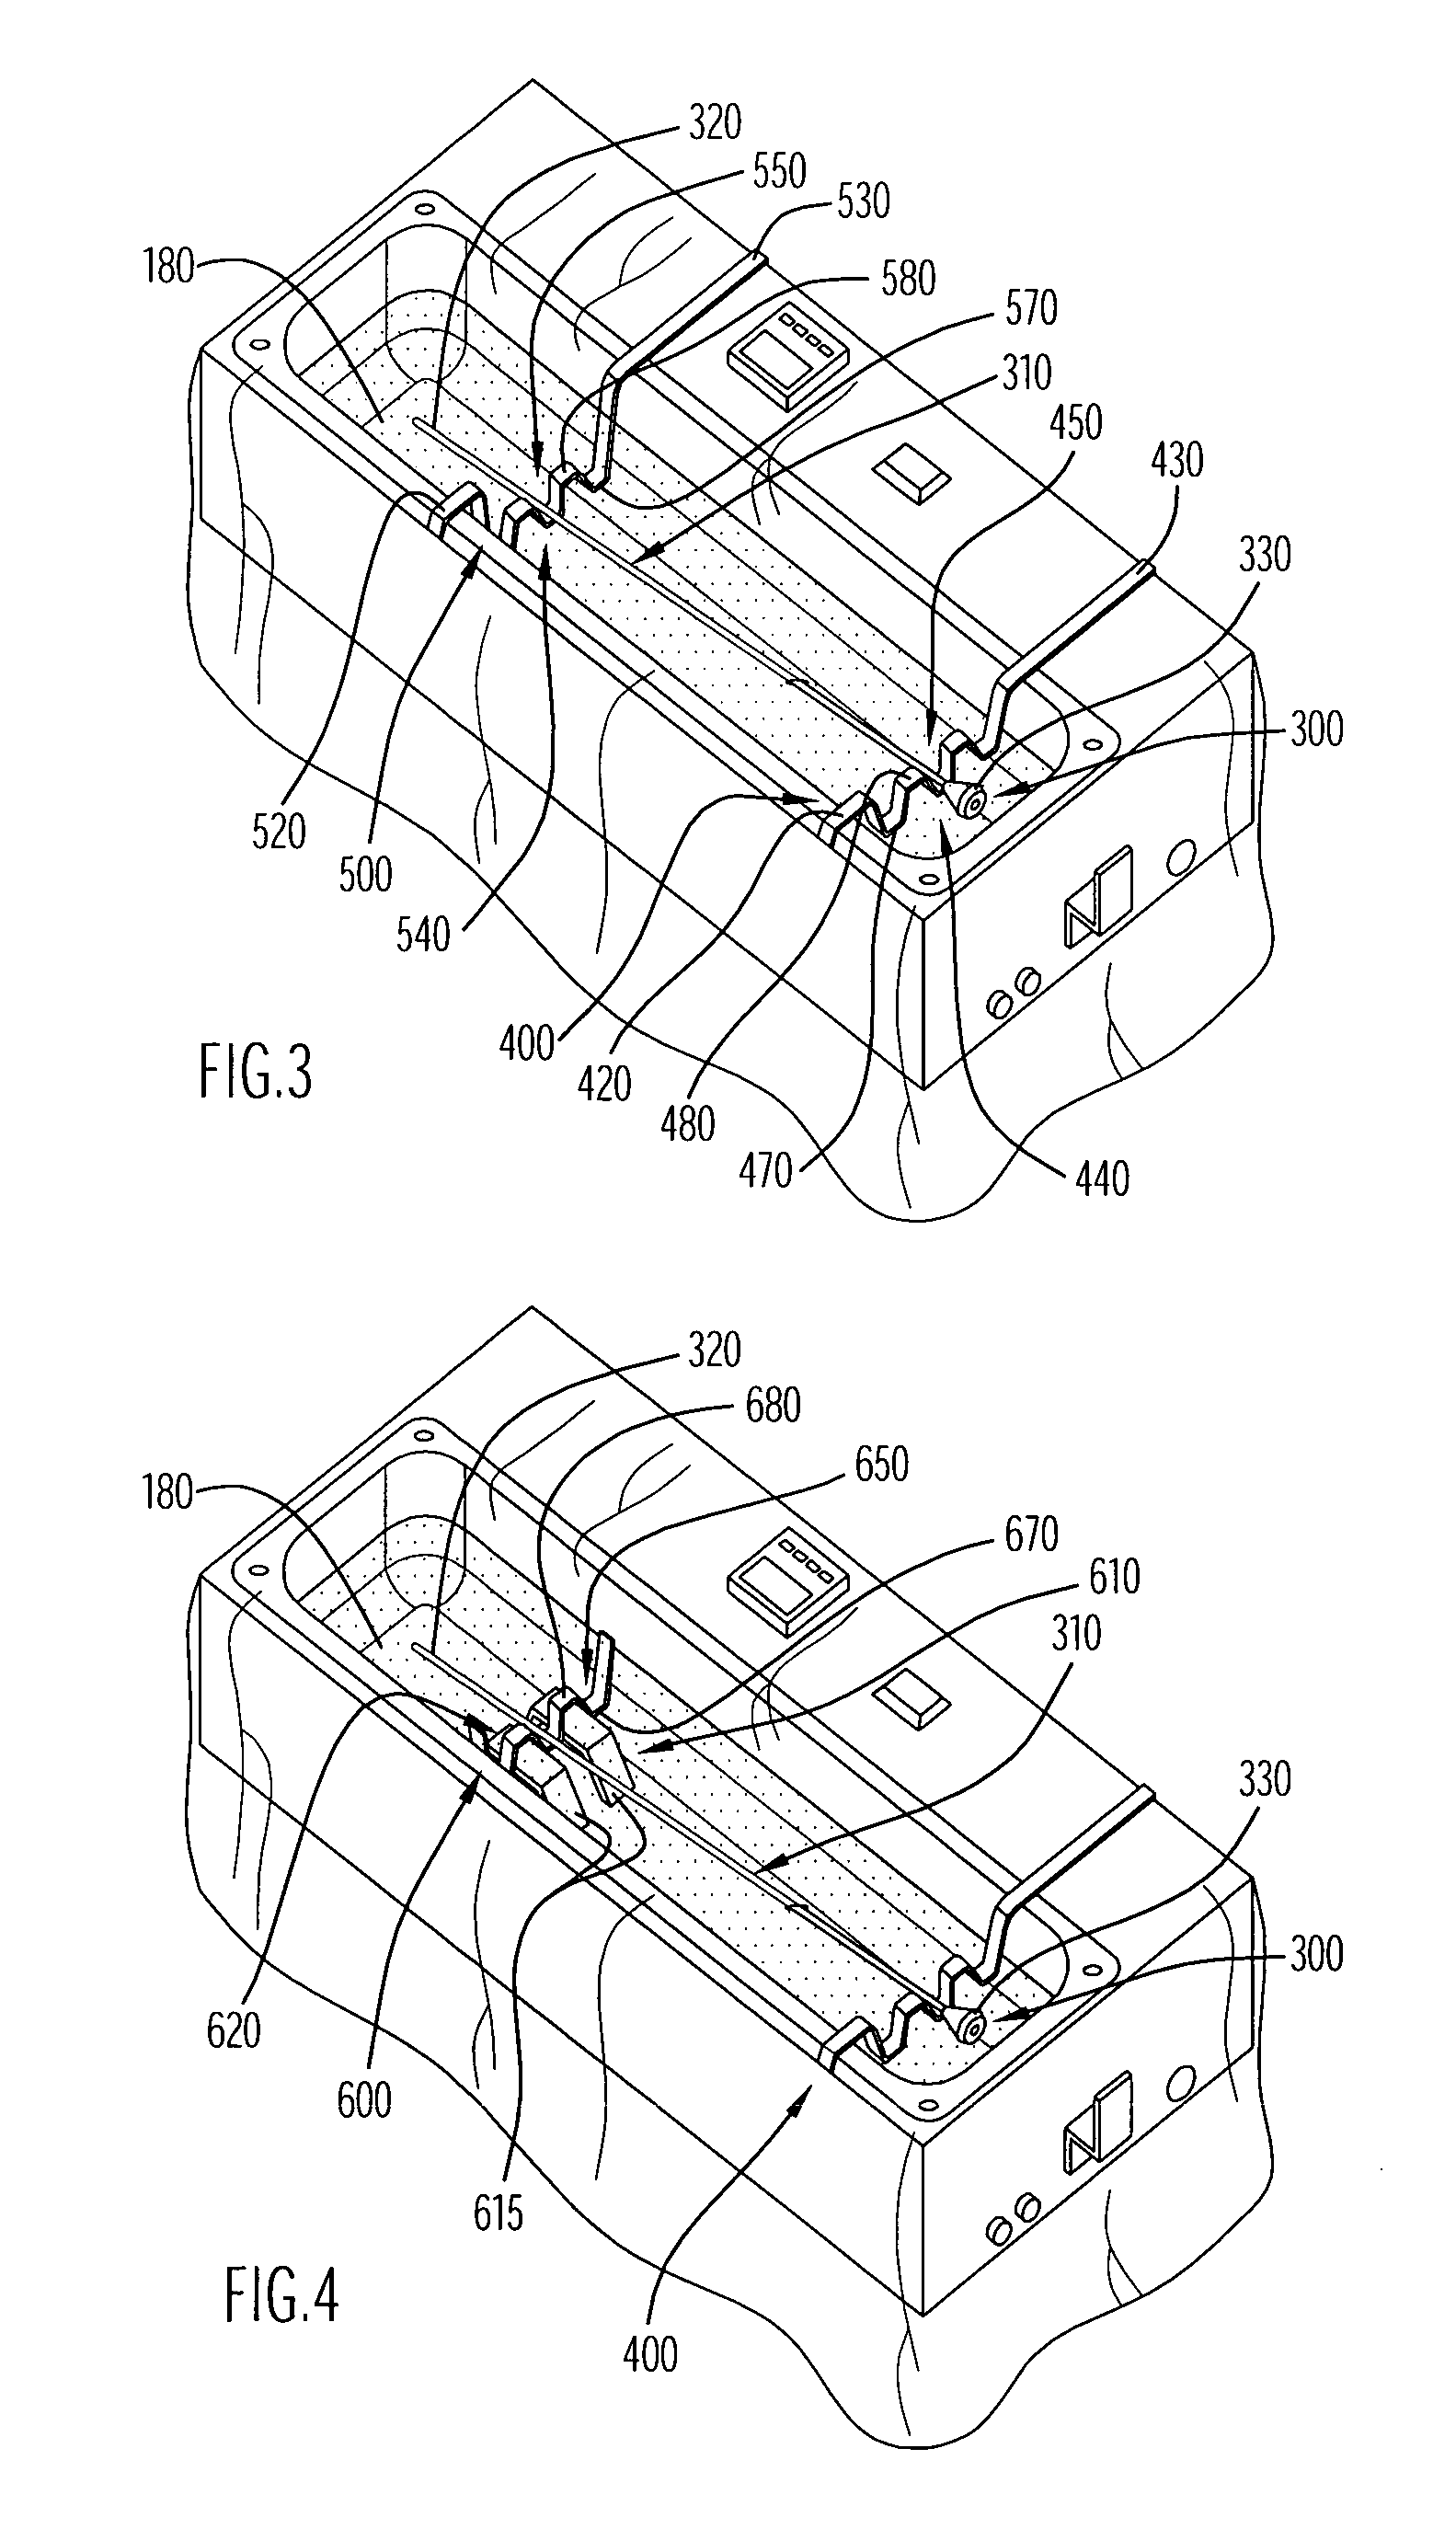 Thermal treatment system instrument rack and method of selectively thermally treating medical instrument portions